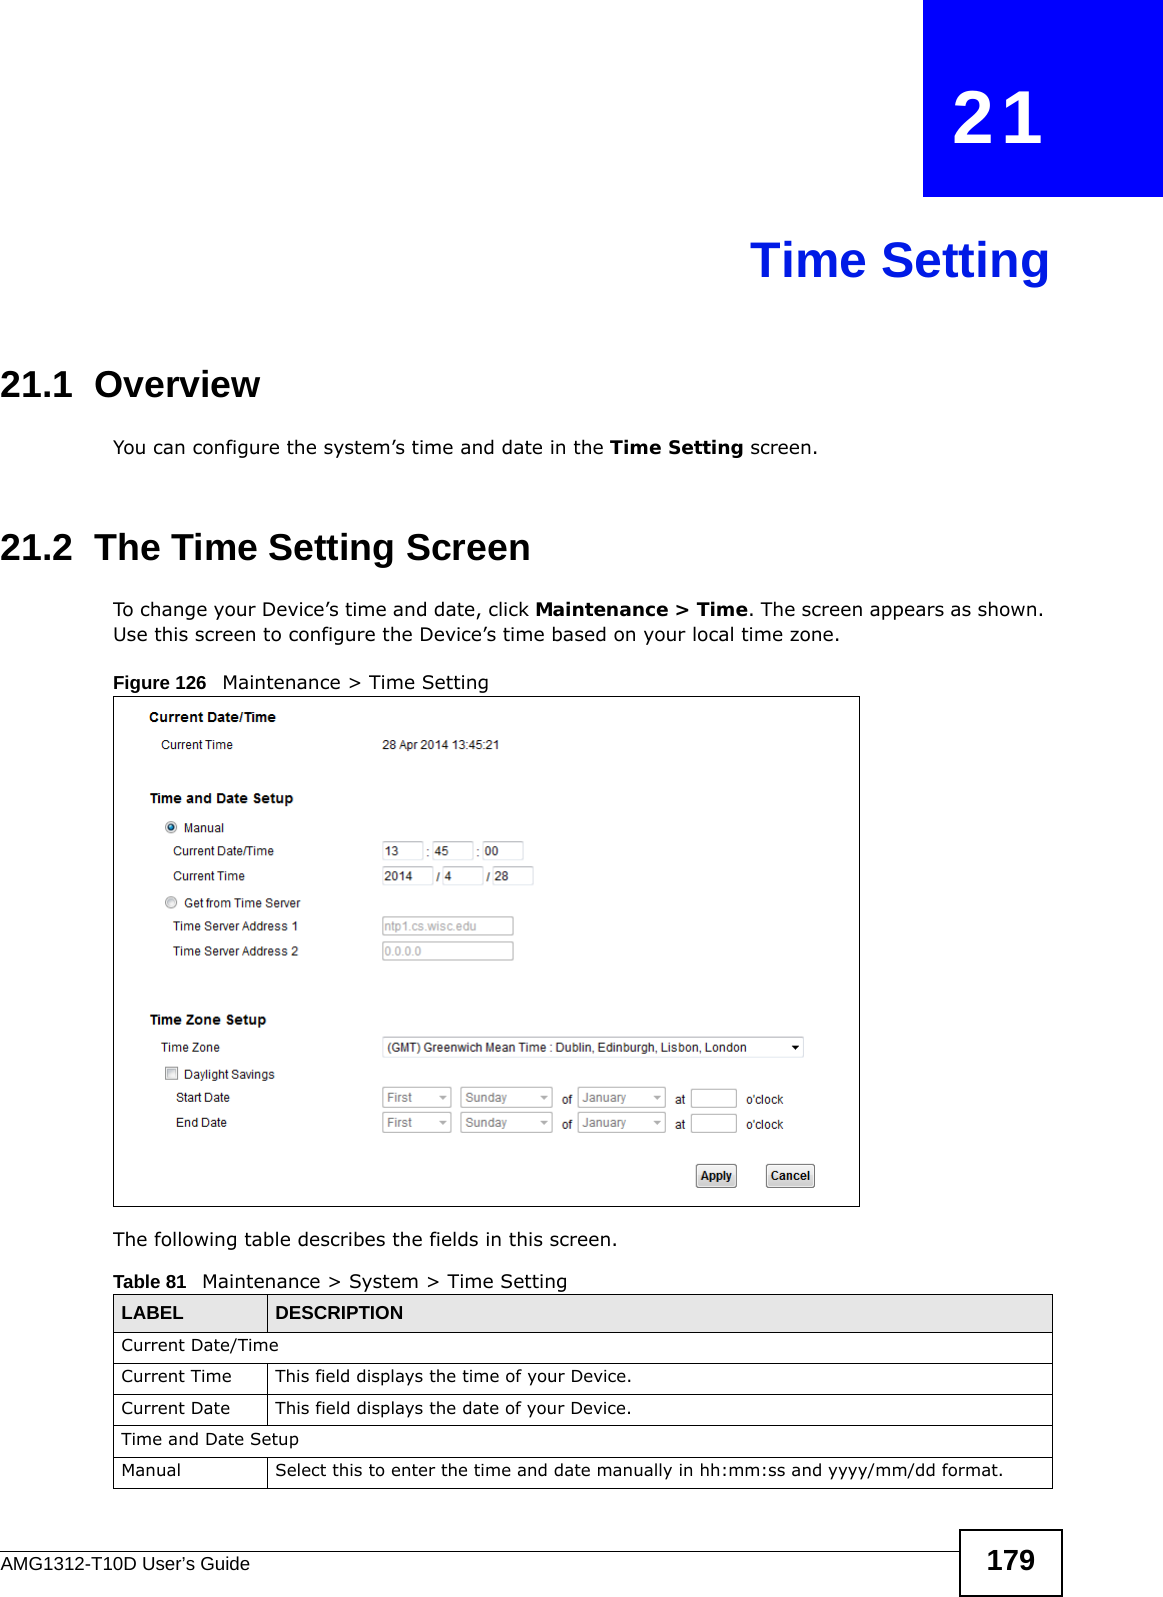 AMG1312-T10D User’s Guide 179CHAPTER   21Time Setting21.1  Overview You can configure the system’s time and date in the Time Setting screen.21.2  The Time Setting Screen To change your Device’s time and date, click Maintenance &gt; Time. The screen appears as shown. Use this screen to configure the Device’s time based on your local time zone. Figure 126   Maintenance &gt; Time Setting The following table describes the fields in this screen. Table 81   Maintenance &gt; System &gt; Time SettingLABEL DESCRIPTIONCurrent Date/Time Current Time  This field displays the time of your Device.Current Date  This field displays the date of your Device. Time and Date Setup Manual Select this to enter the time and date manually in hh:mm:ss and yyyy/mm/dd format.